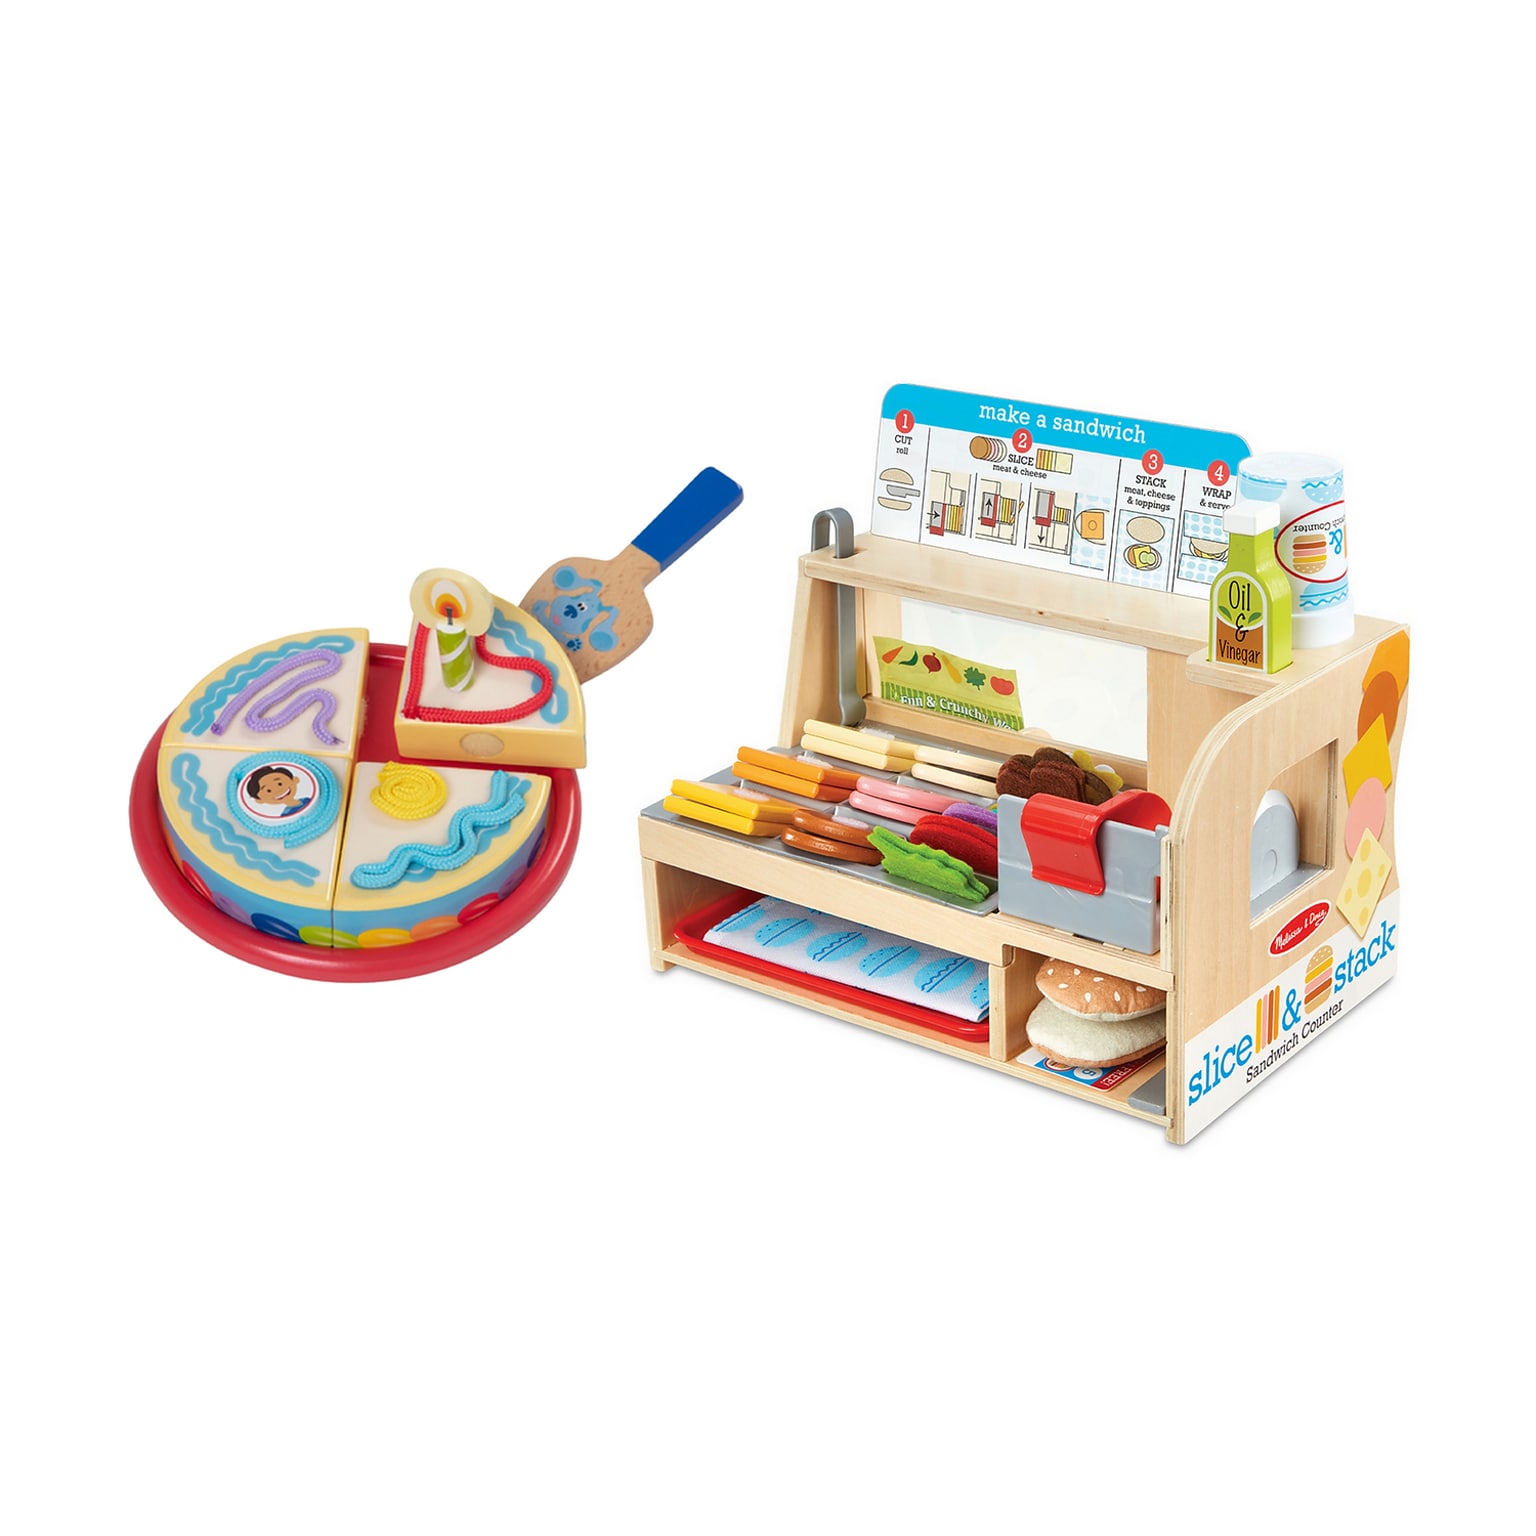 Mattel Blues Clues & You Wooden Birthday Party Play Set with Slice & Stack Sandwich Counter, Multicolored (33018-31650-KIT)